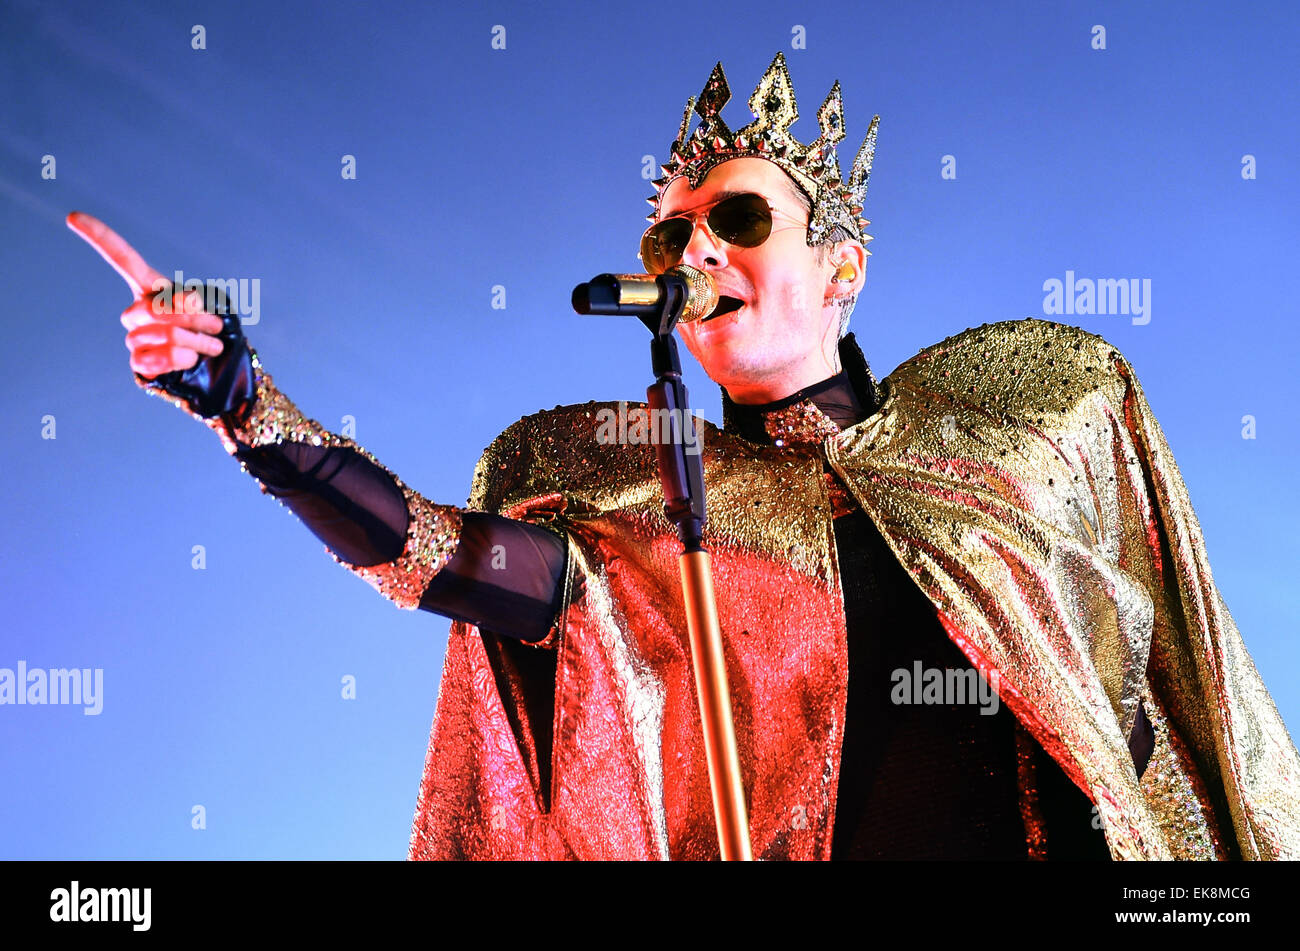 Singer Bill Kaulitz of the band Tokio Hotel performs on stage during their 'Feel it All - World Tour 2015' in Berlin, Germany, 23 March 2015. Photo: Britta Pedersen/dpa Stock Photo